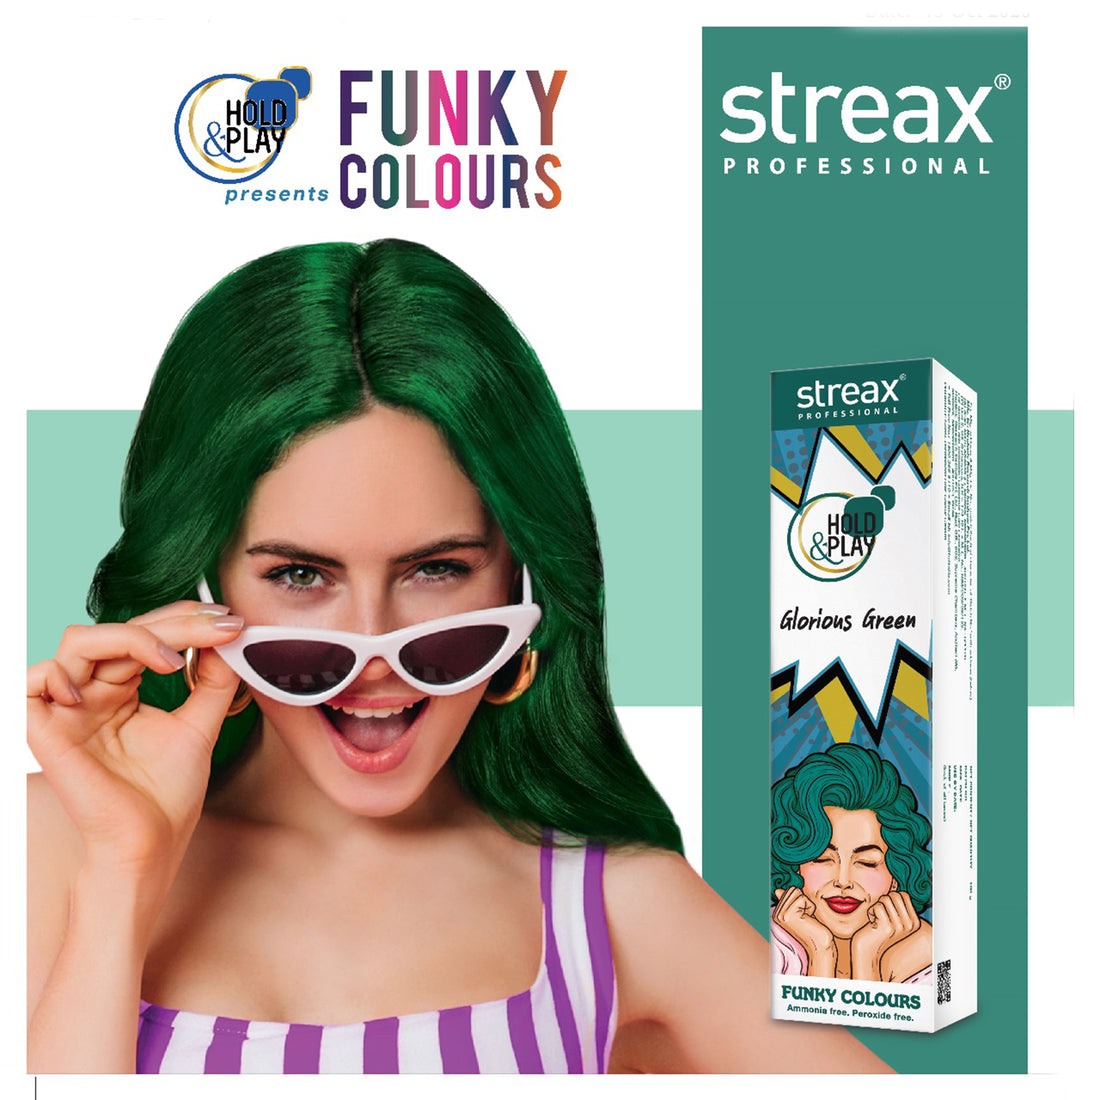 Streax Professional Hold and Play Funky Hair Colour